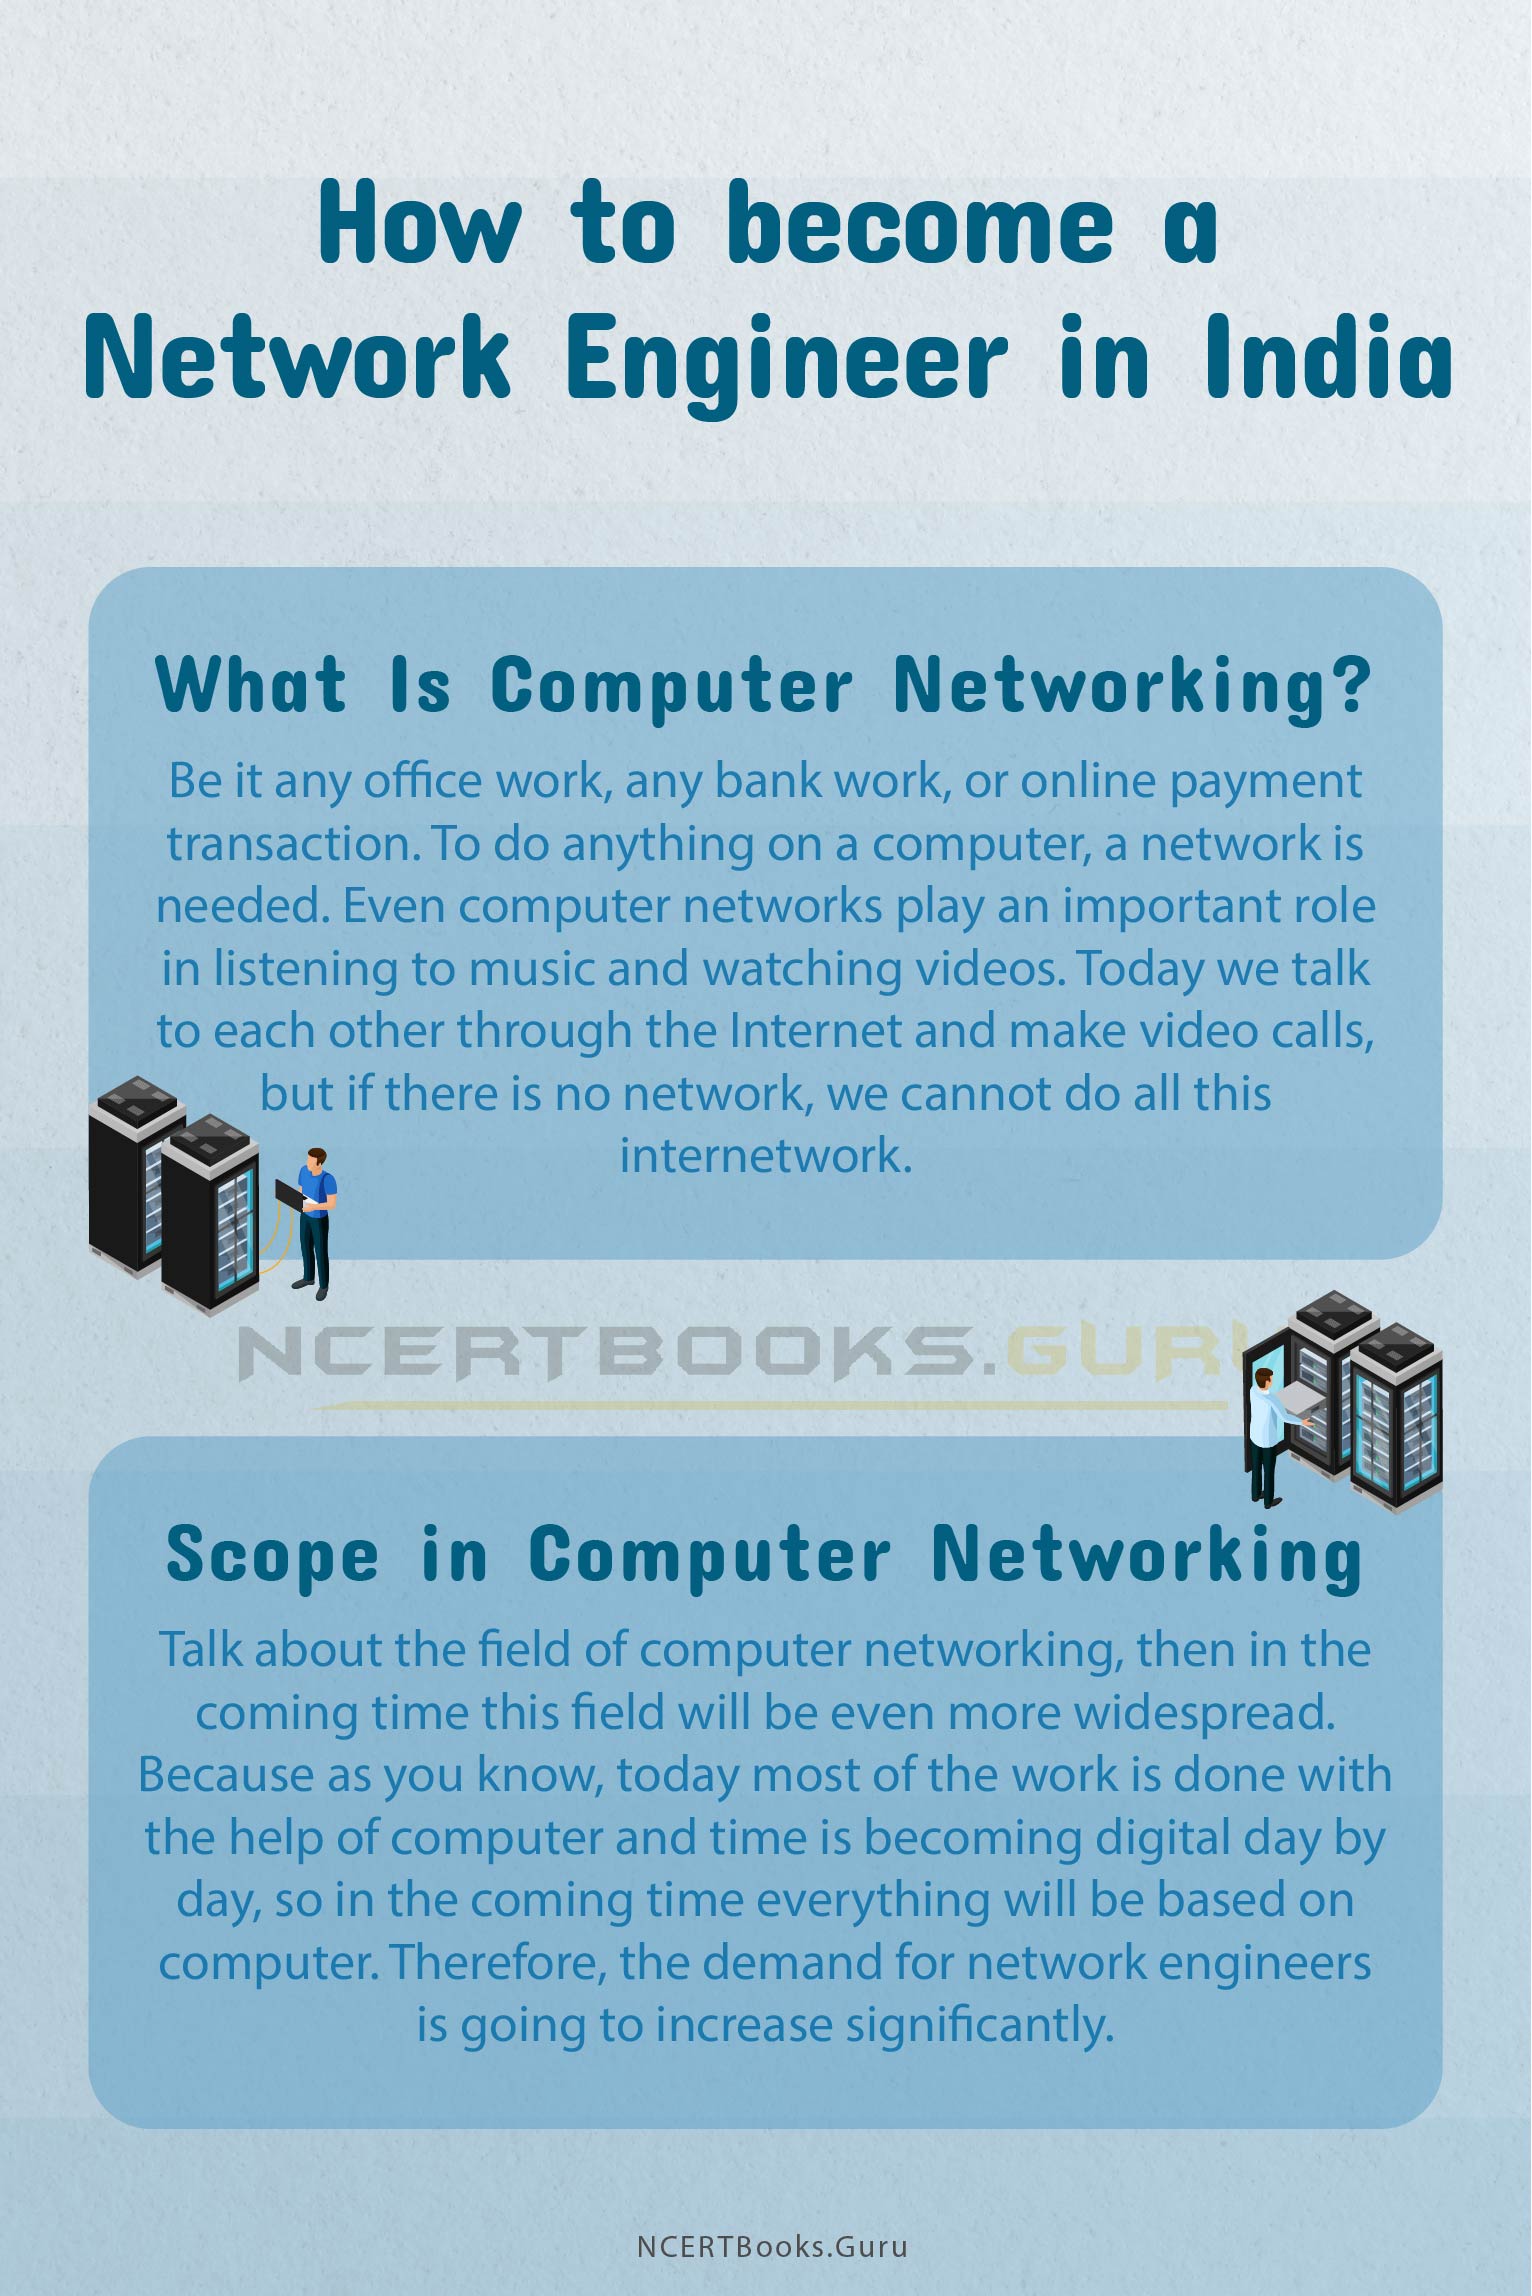 How to become a Network Engineer in India 1